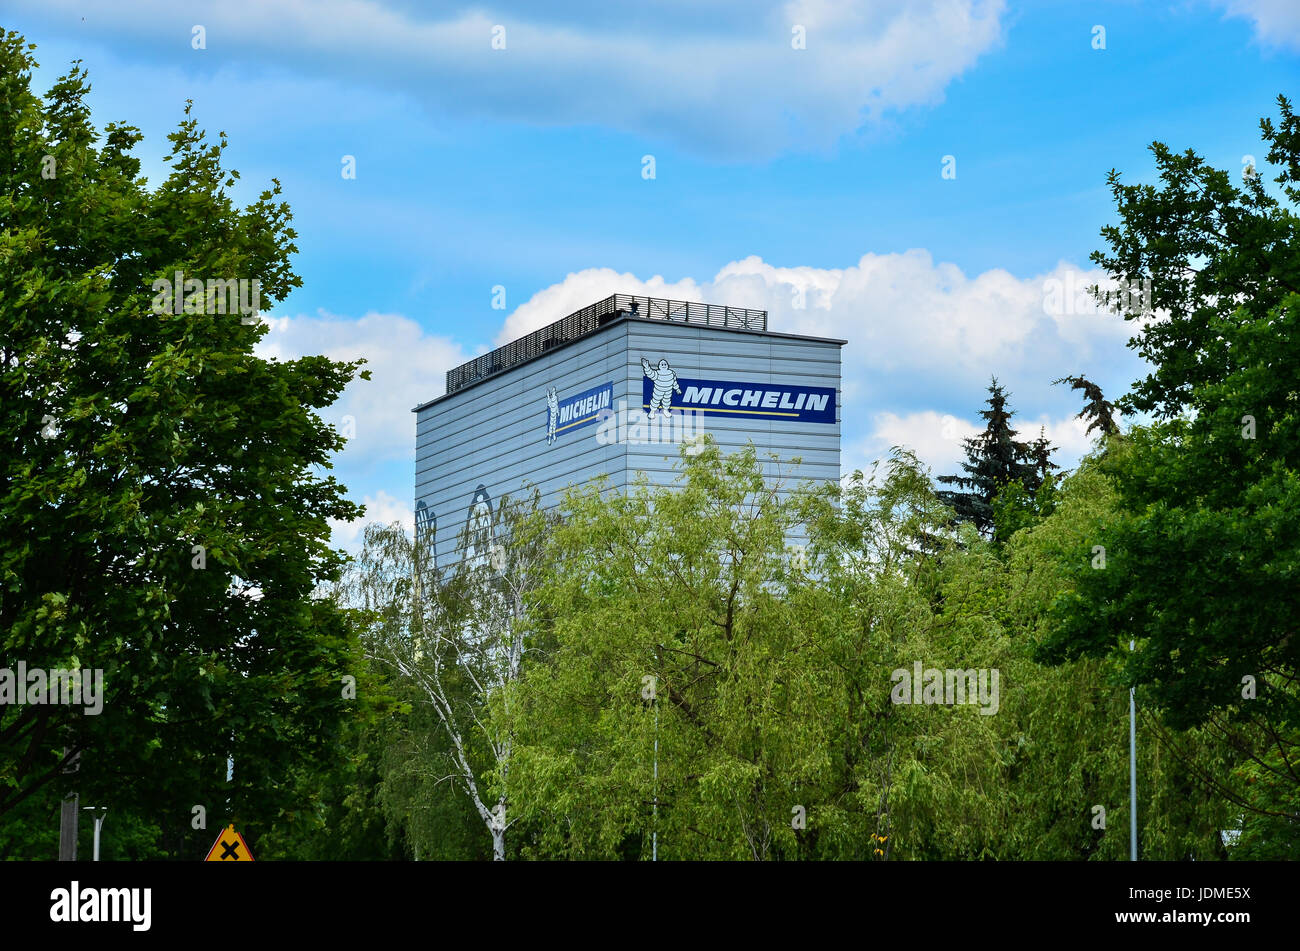 Michelin logo sign on blue sky background. Bibendum, commonly referred to as the Michelin Man, is the symbol of the Michelin tyre company.Michelin man Stock Photo